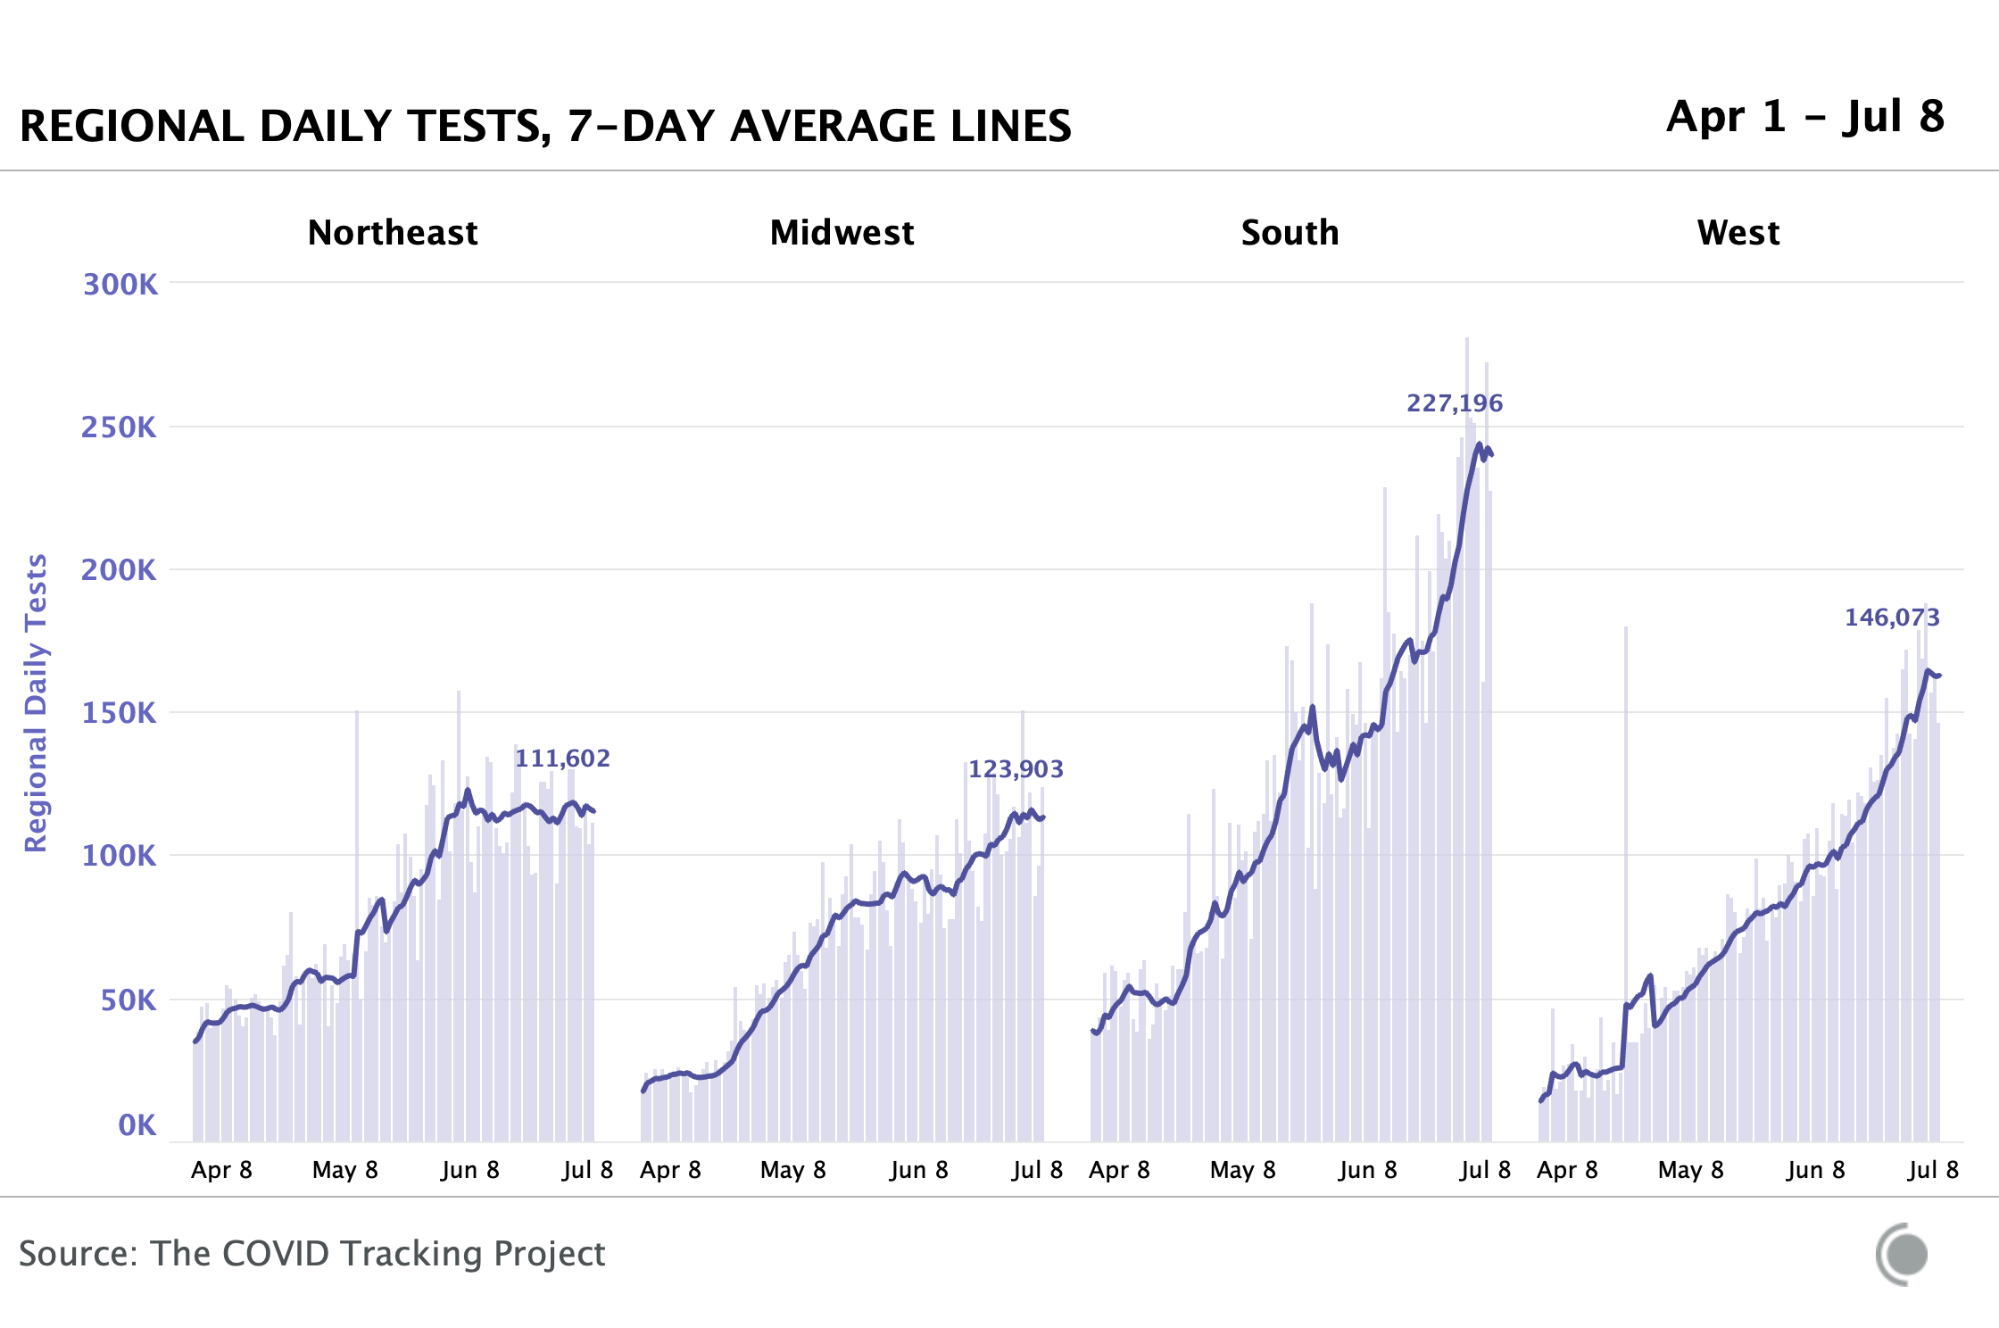 Regional daily tests chart for April 1 to June 8 showing tests rising until recently and then holding steady, first in the Northweast and then in the Midwest, South, and West.